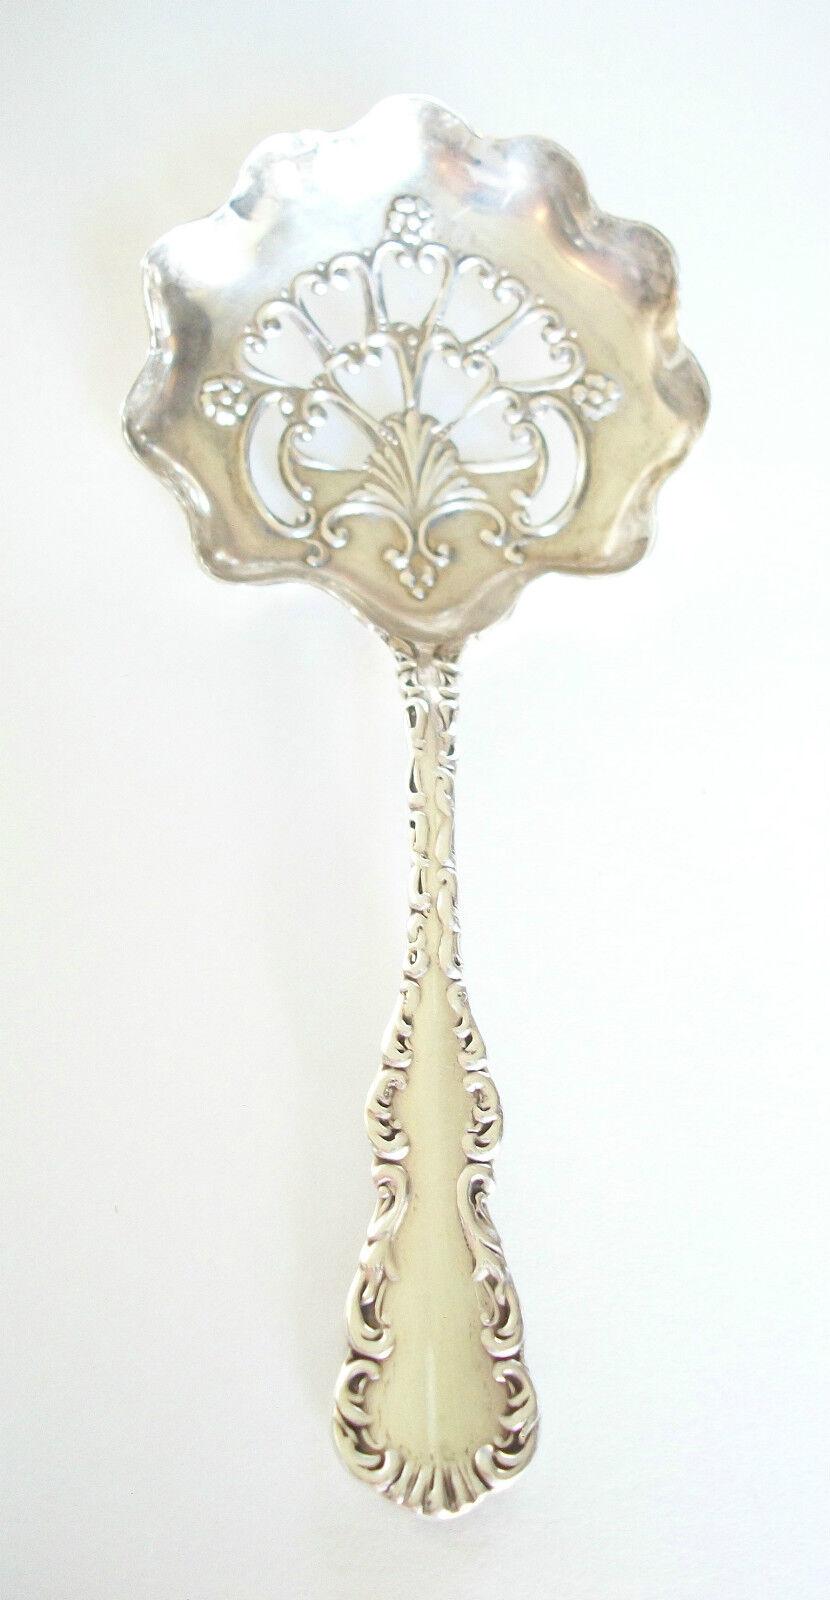 RODEN BROTHERS LIMITED - Louis XV pattern - Rare antique sterling silver serving spoon - signed/hallmarked on the back of the handle - Canada - circa 1910.

Excellent antique condition - no loss - no damage - no repairs - tarnishing & fine surface